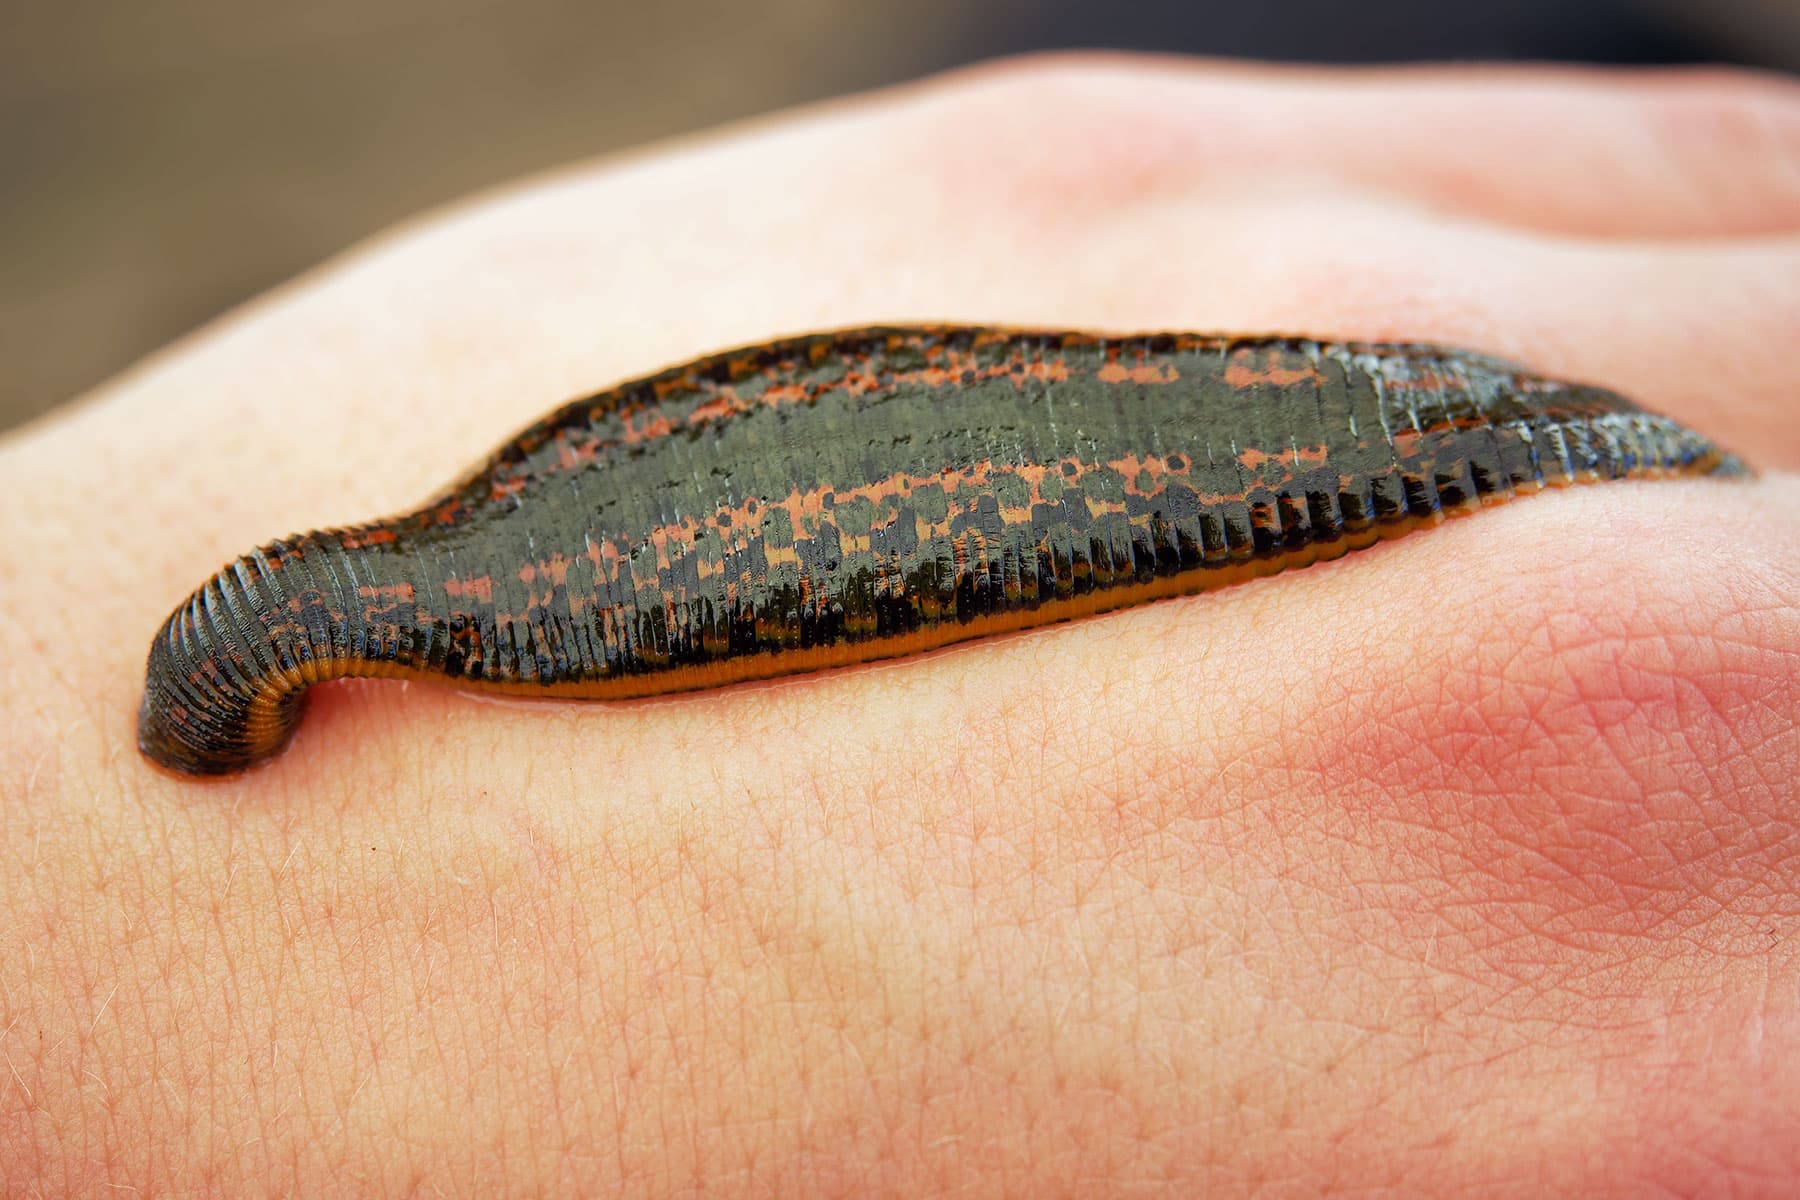 Blood-Sucking Leeches: Quack Medicine or Medical Miracle?